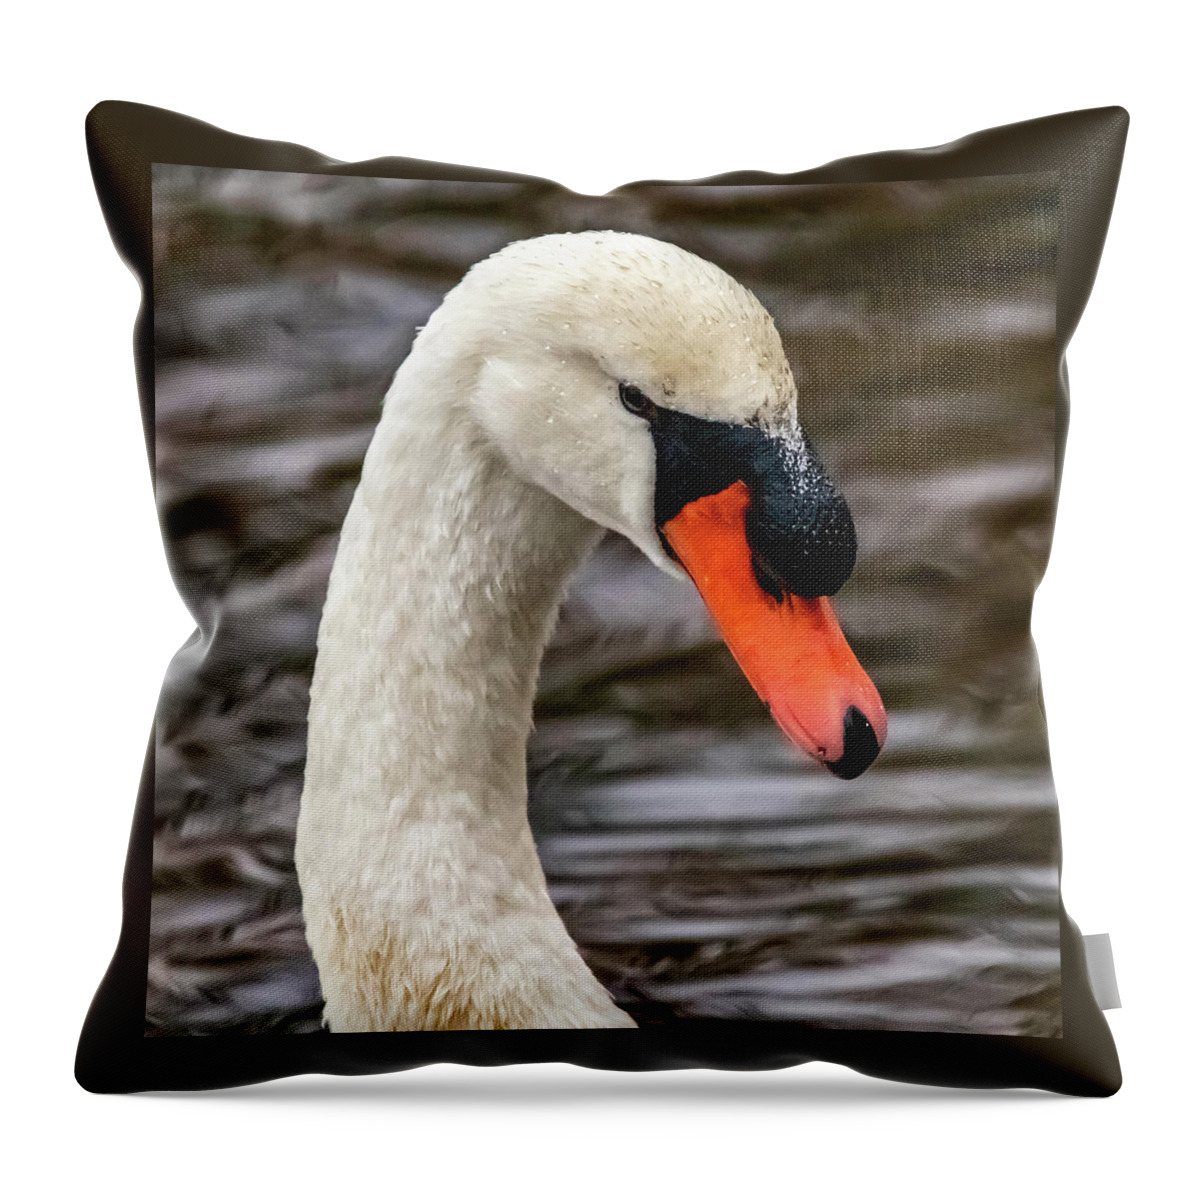 Swan Throw Pillow featuring the photograph Mr, Swan by William Bretton